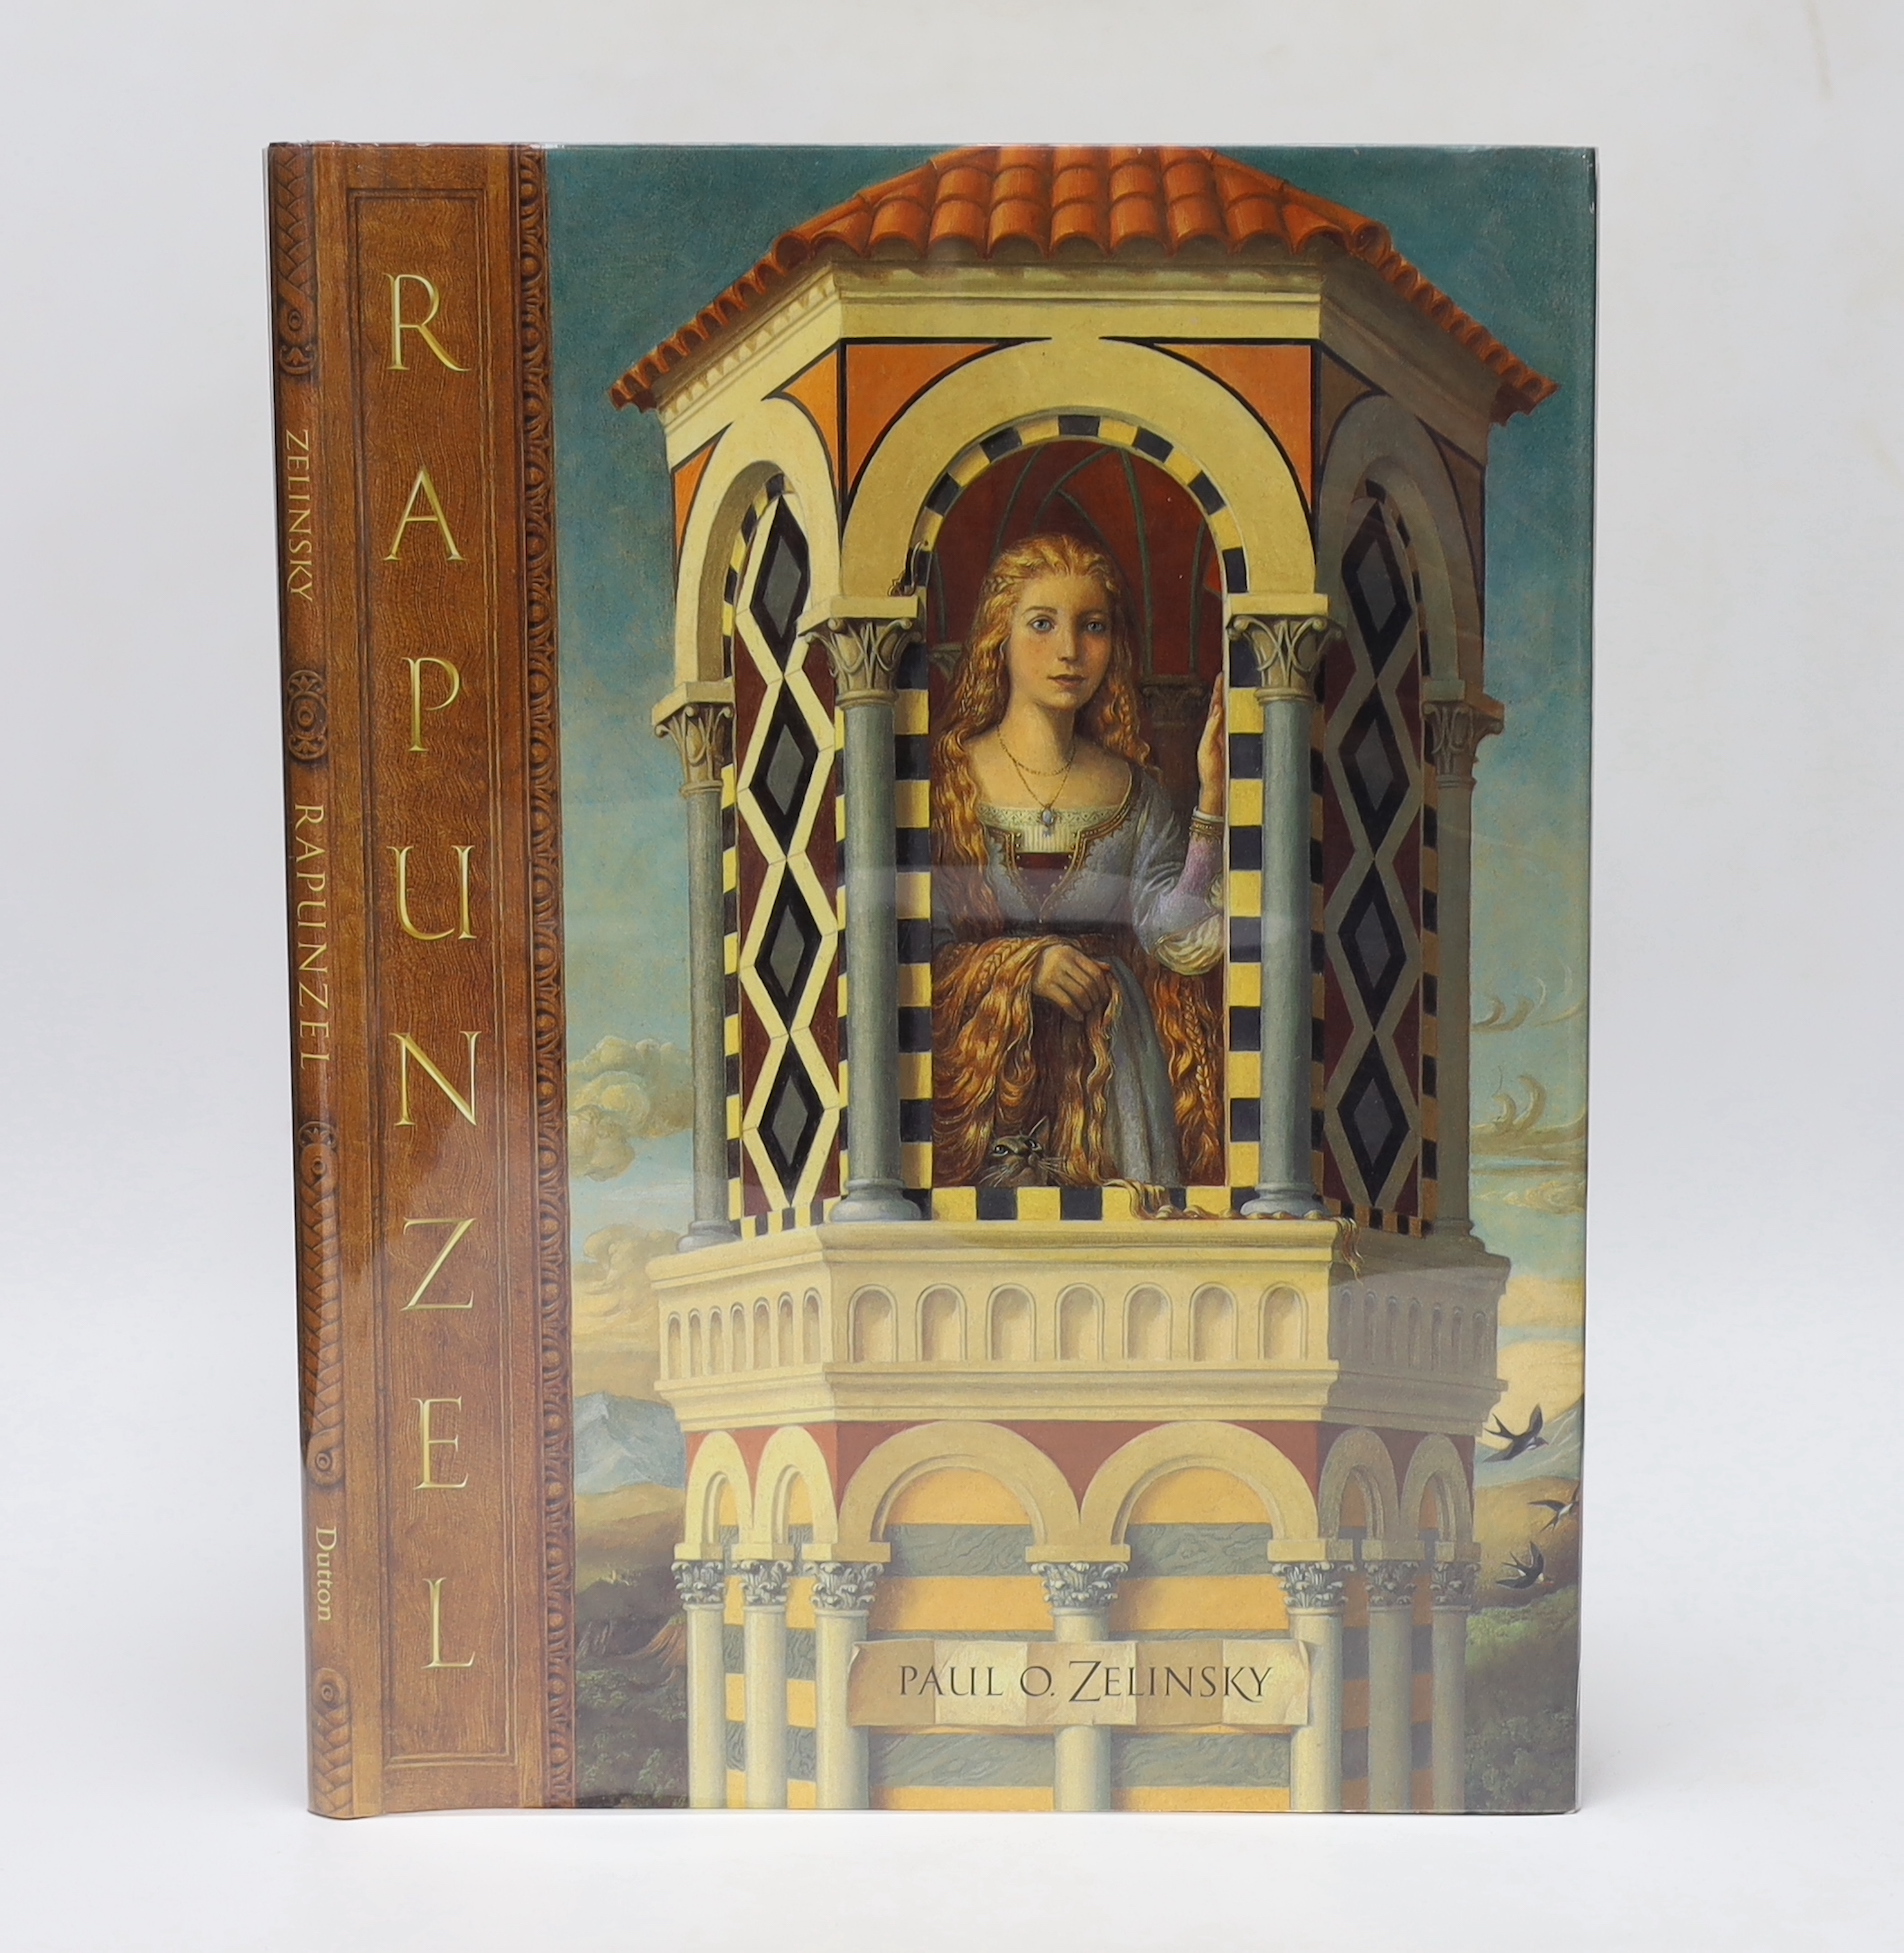 Zelinsky, Paul O - Rapunzel, 1st edition, 4to, original pictorial laminated boards, illustrated endpapers, Dutton, New York, 1997.